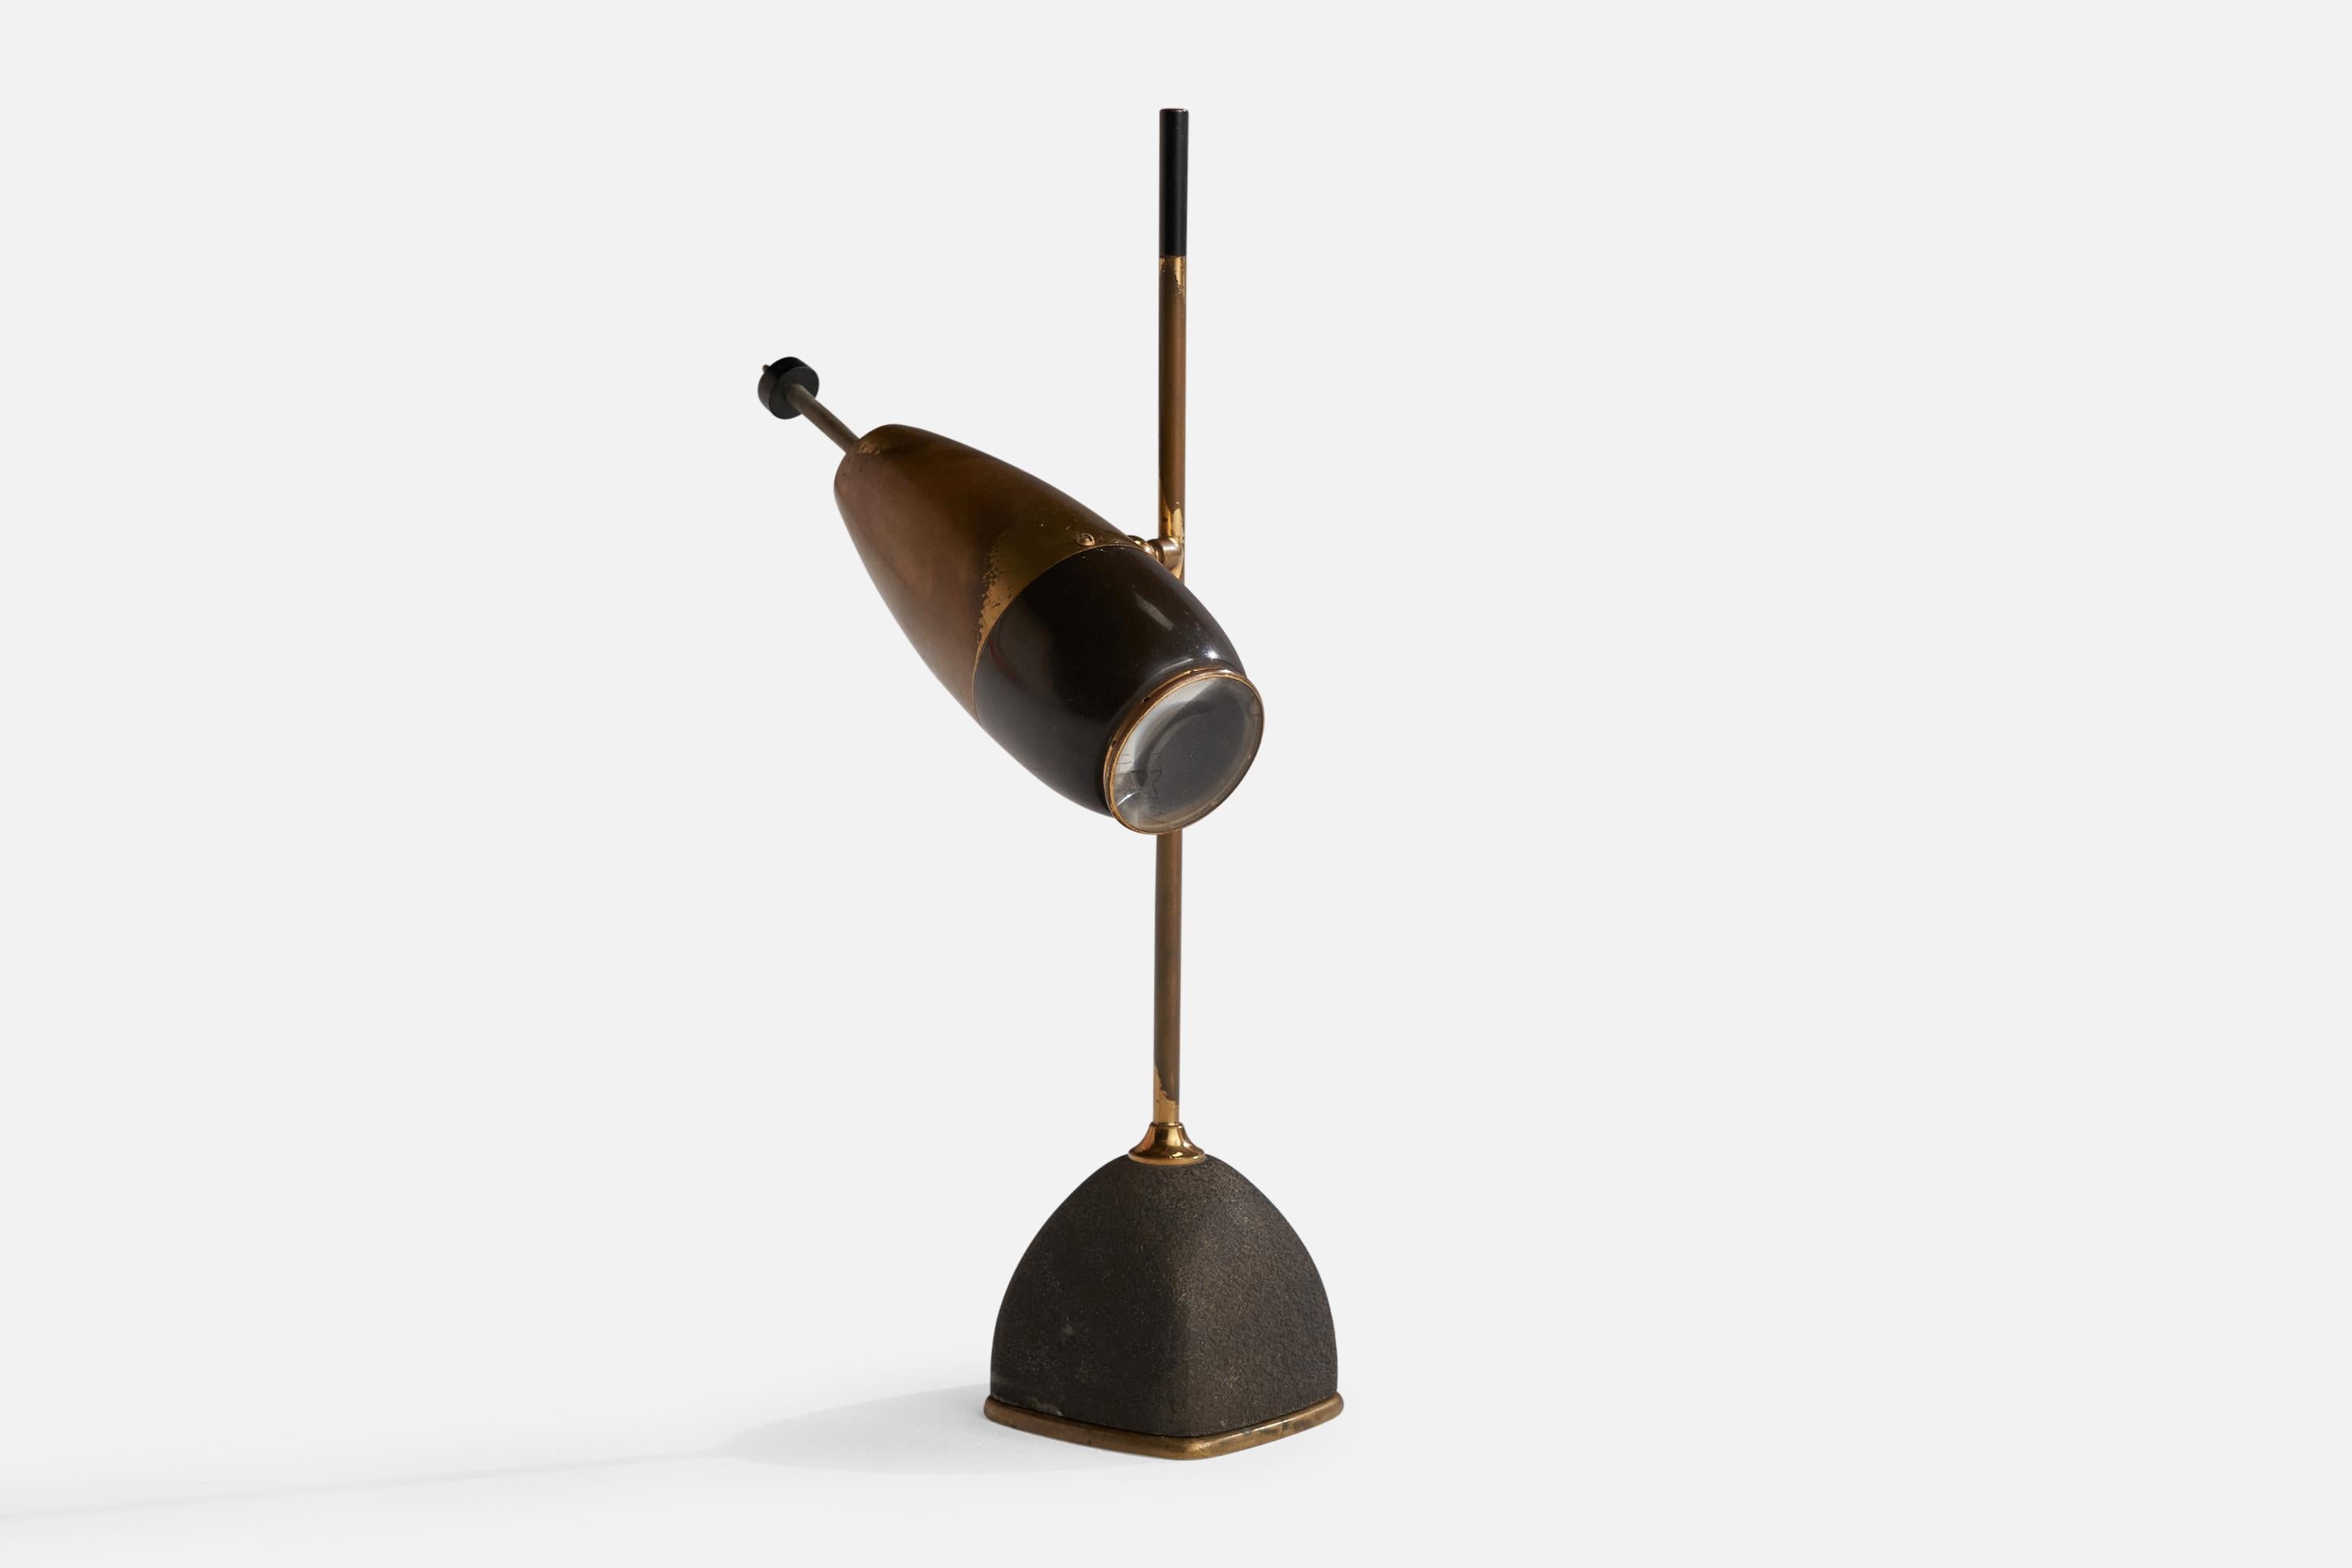 An adjustable brass and black-lacquered metal table lamp designed by Oscar Torlasco and produced by Lumi, Milano, Italy, 1950s.

Overall Dimensions (inches): 14.5”  H x 3.5”  W x 3” D
Stated dimensions include shade.
Bulb Specifications: E-10